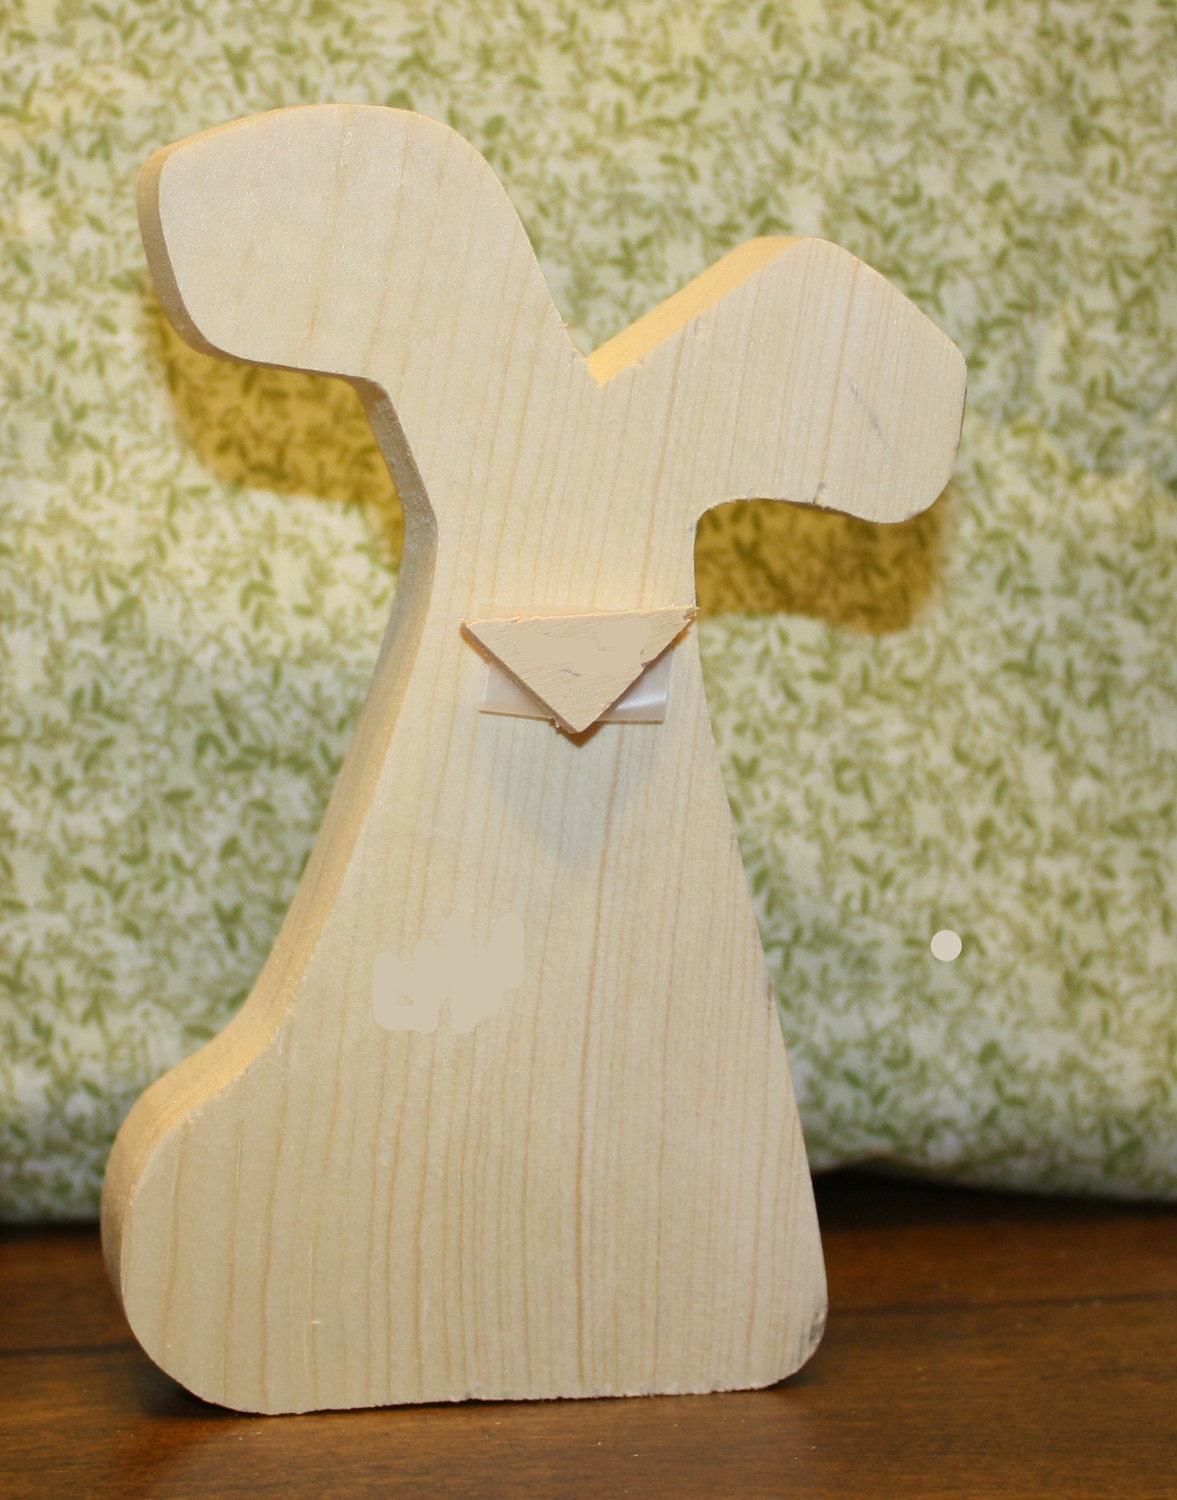 UNFINISHED  Easter wood letters with chick as the "A" and rabbit as the "R".